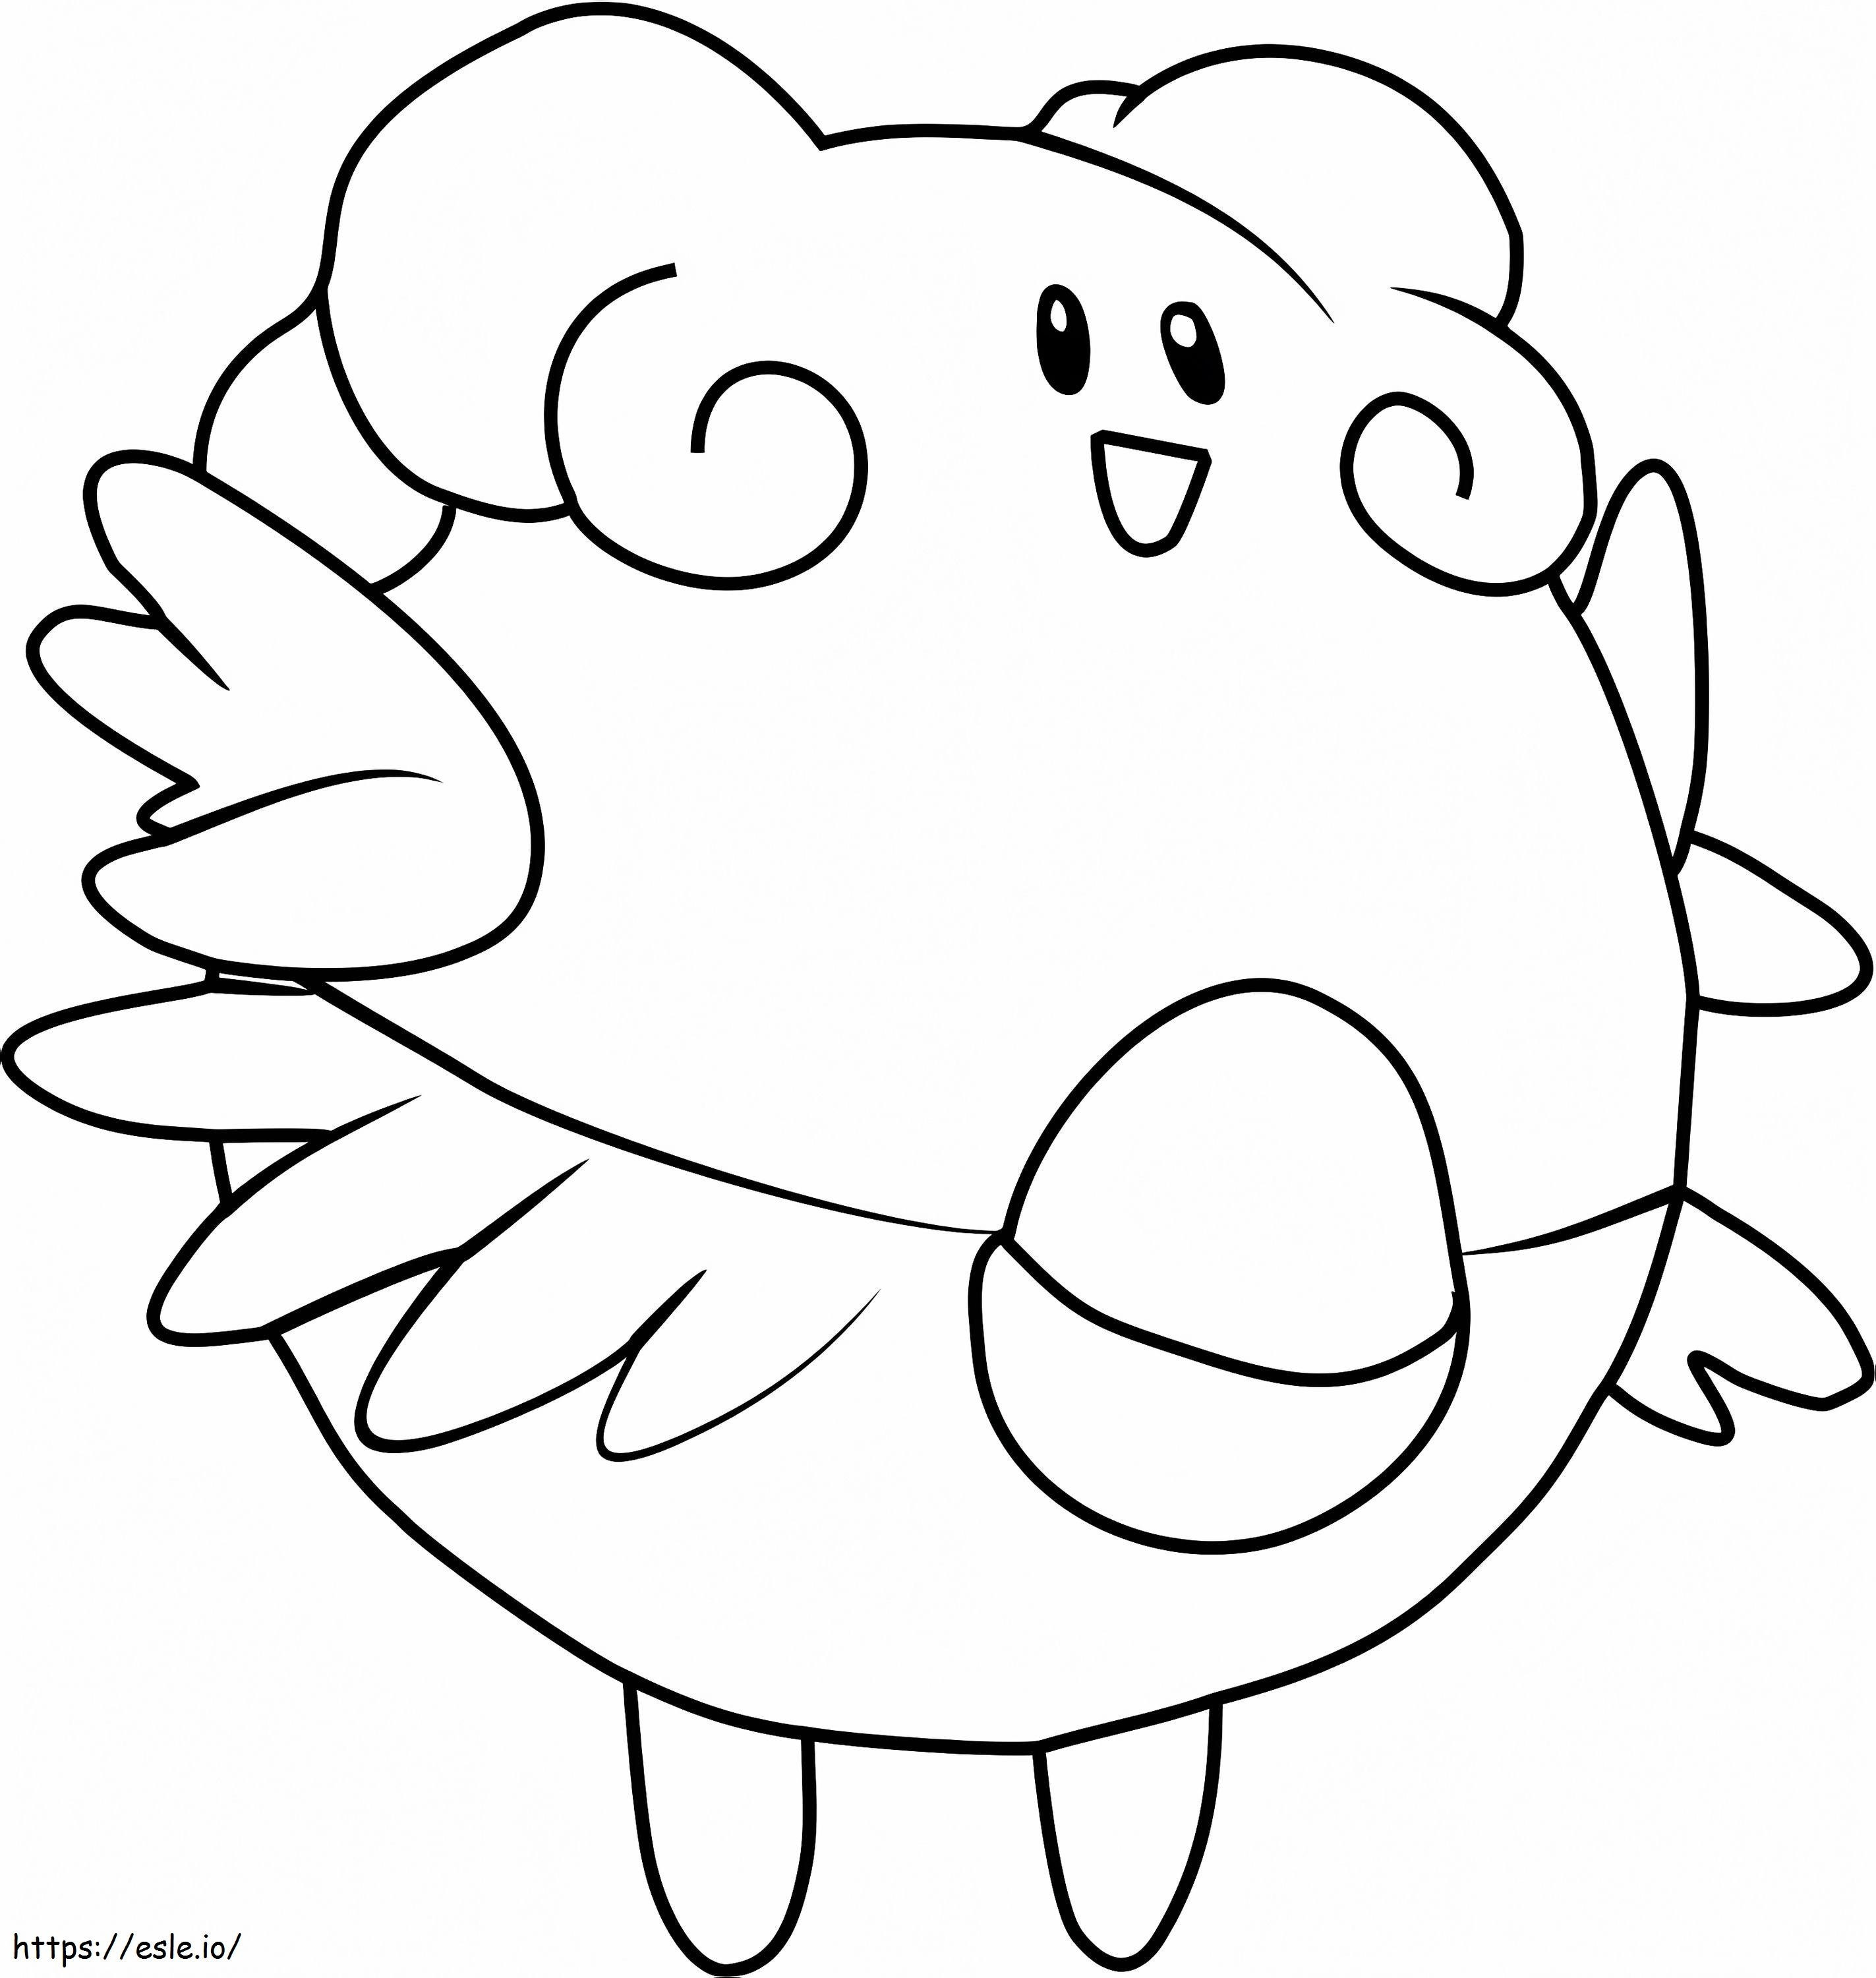 1531969293 Cute Blissey Pokemon A4 coloring page